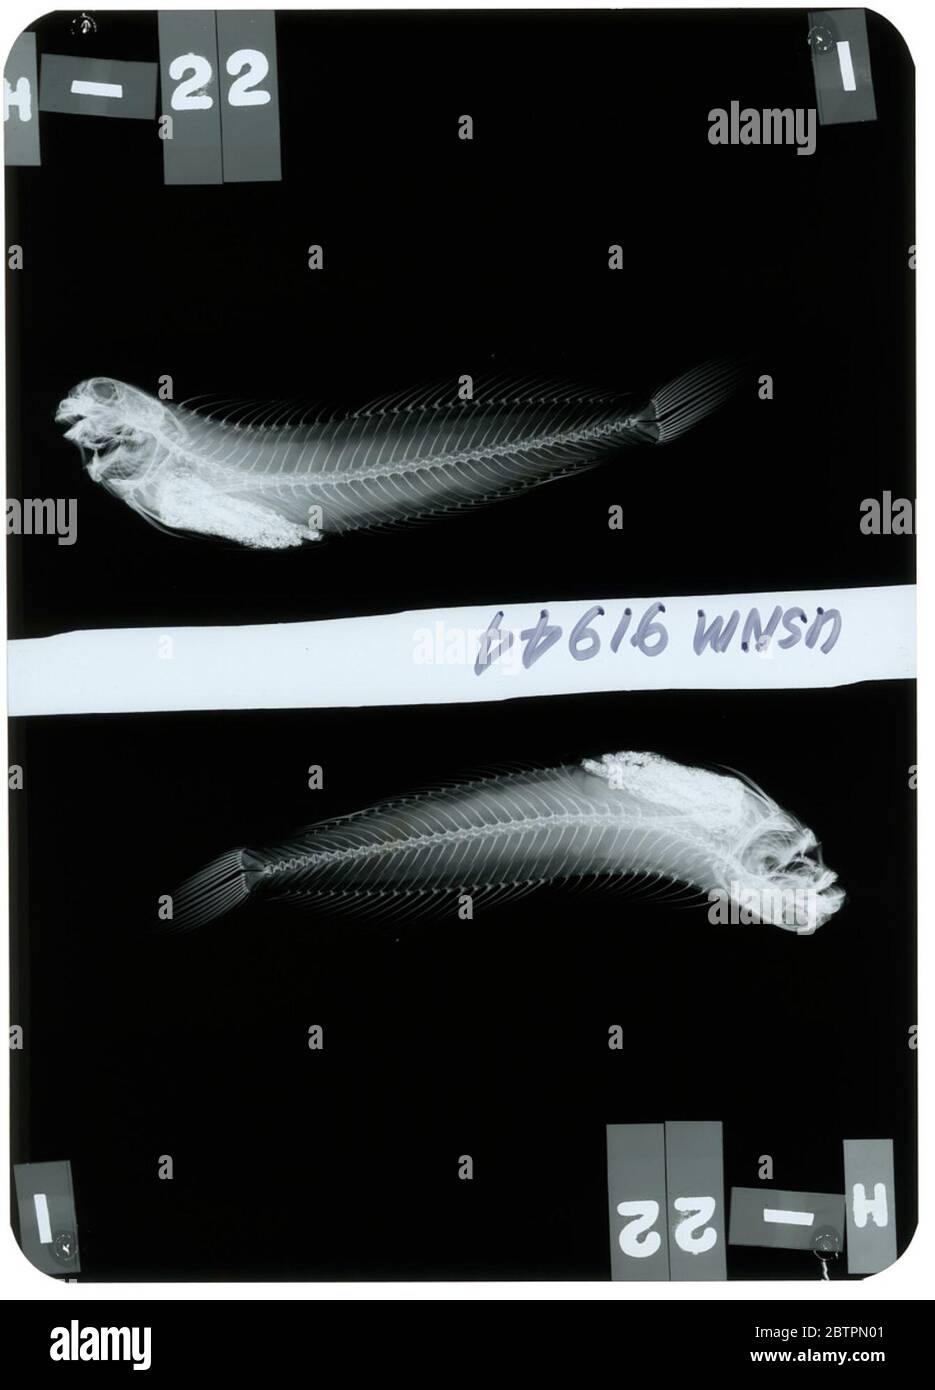 Salarias kellersi Fowler. Radiograph is of a holotype; The Smithsonian NMNH Division of Fishes uses the convention of maintaining the original species name for type specimens designated at the time of description. The currently accepted name for this species is Istiblennius bellus.24 Oct 20181 Stock Photo